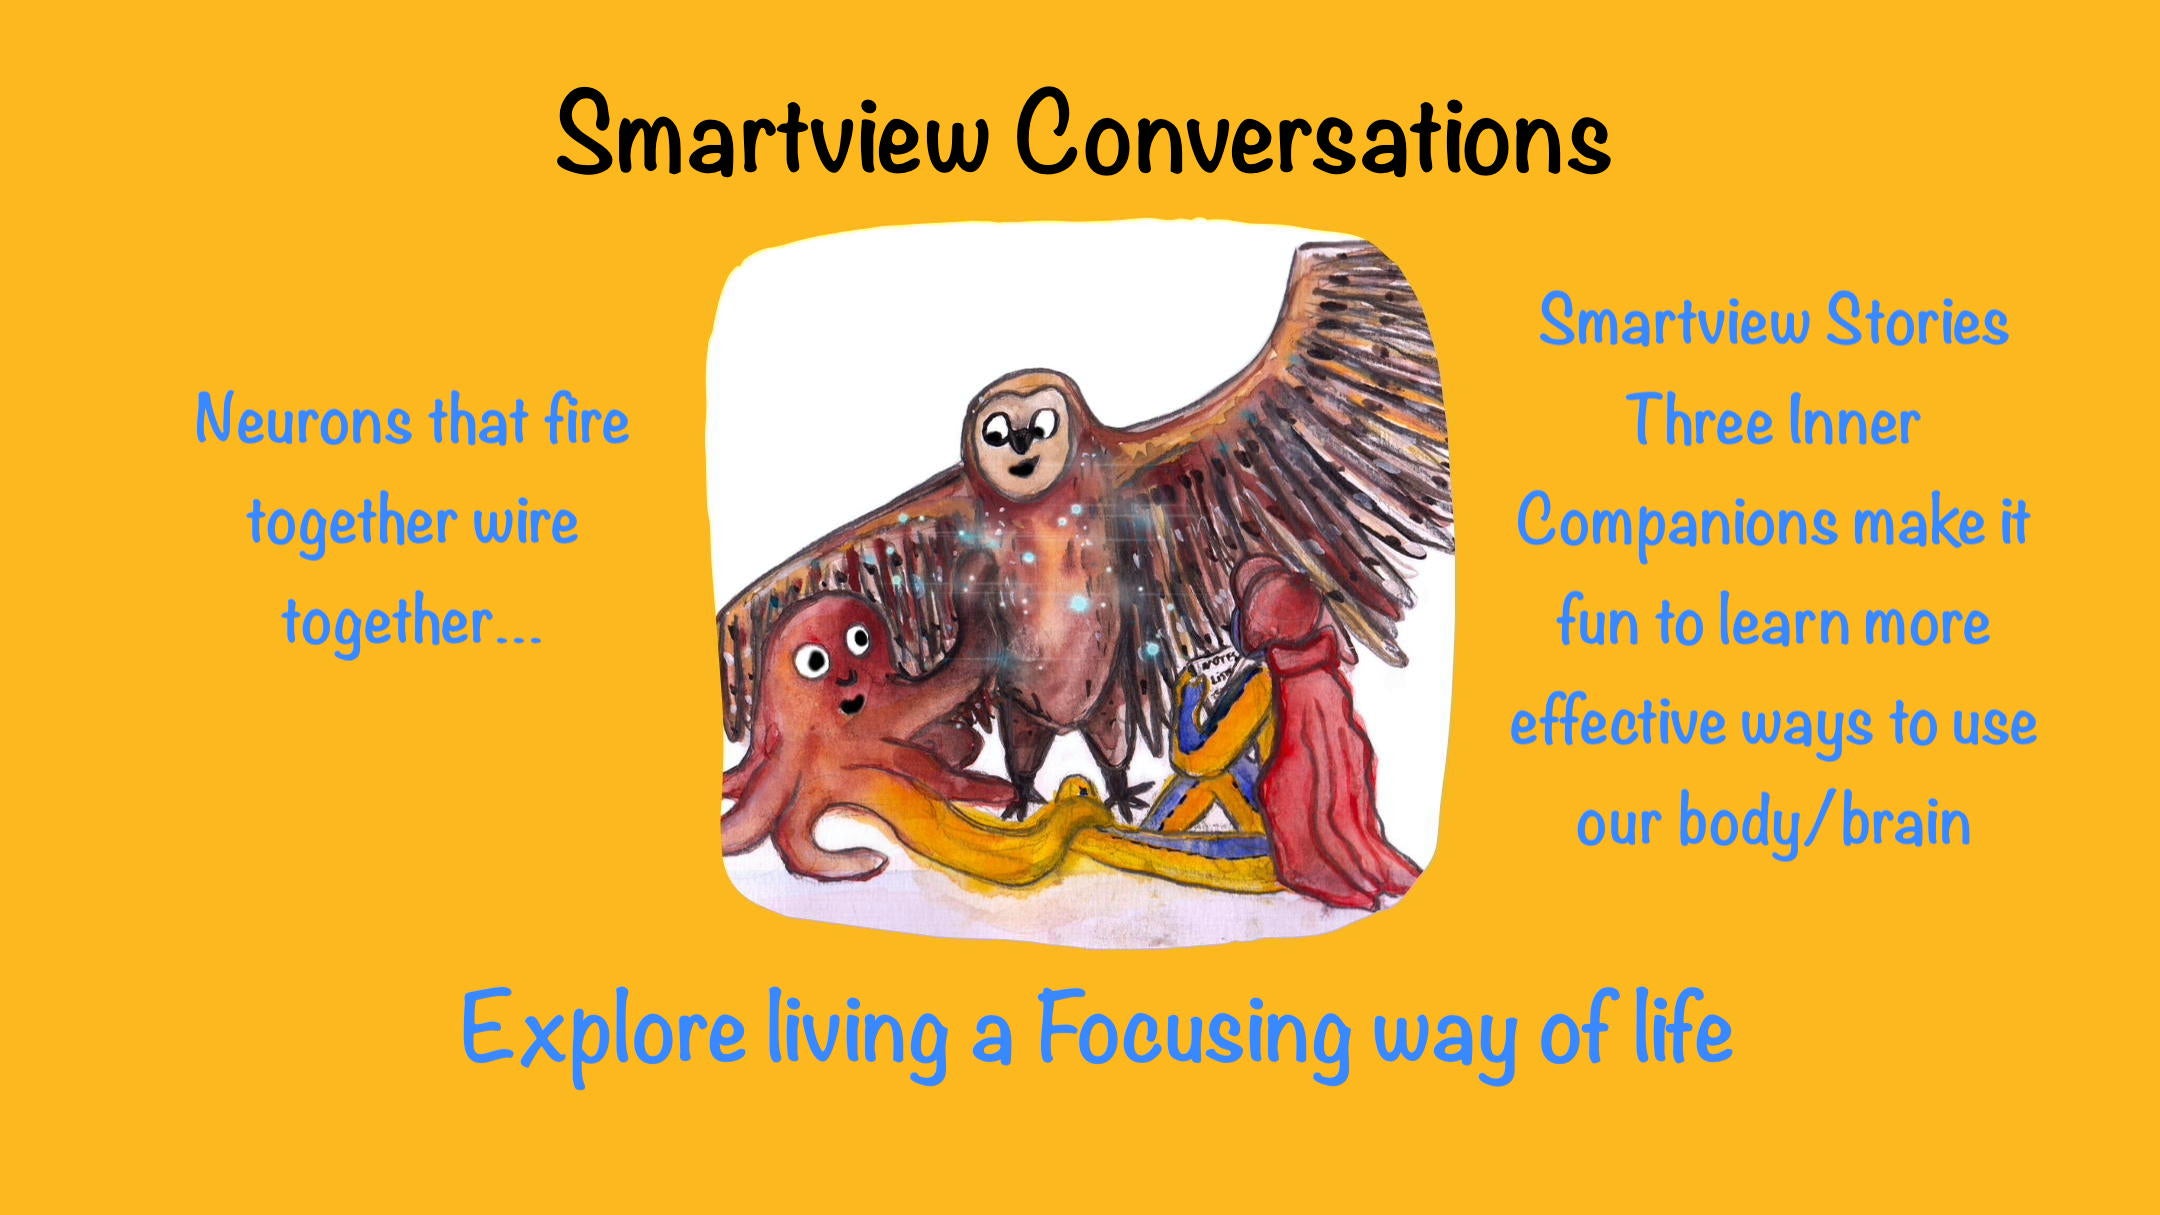 Neurons that wire together fire together. Smartview Stories Three Inner Companions make it fun to learn more effective ways to use our body/brain. 